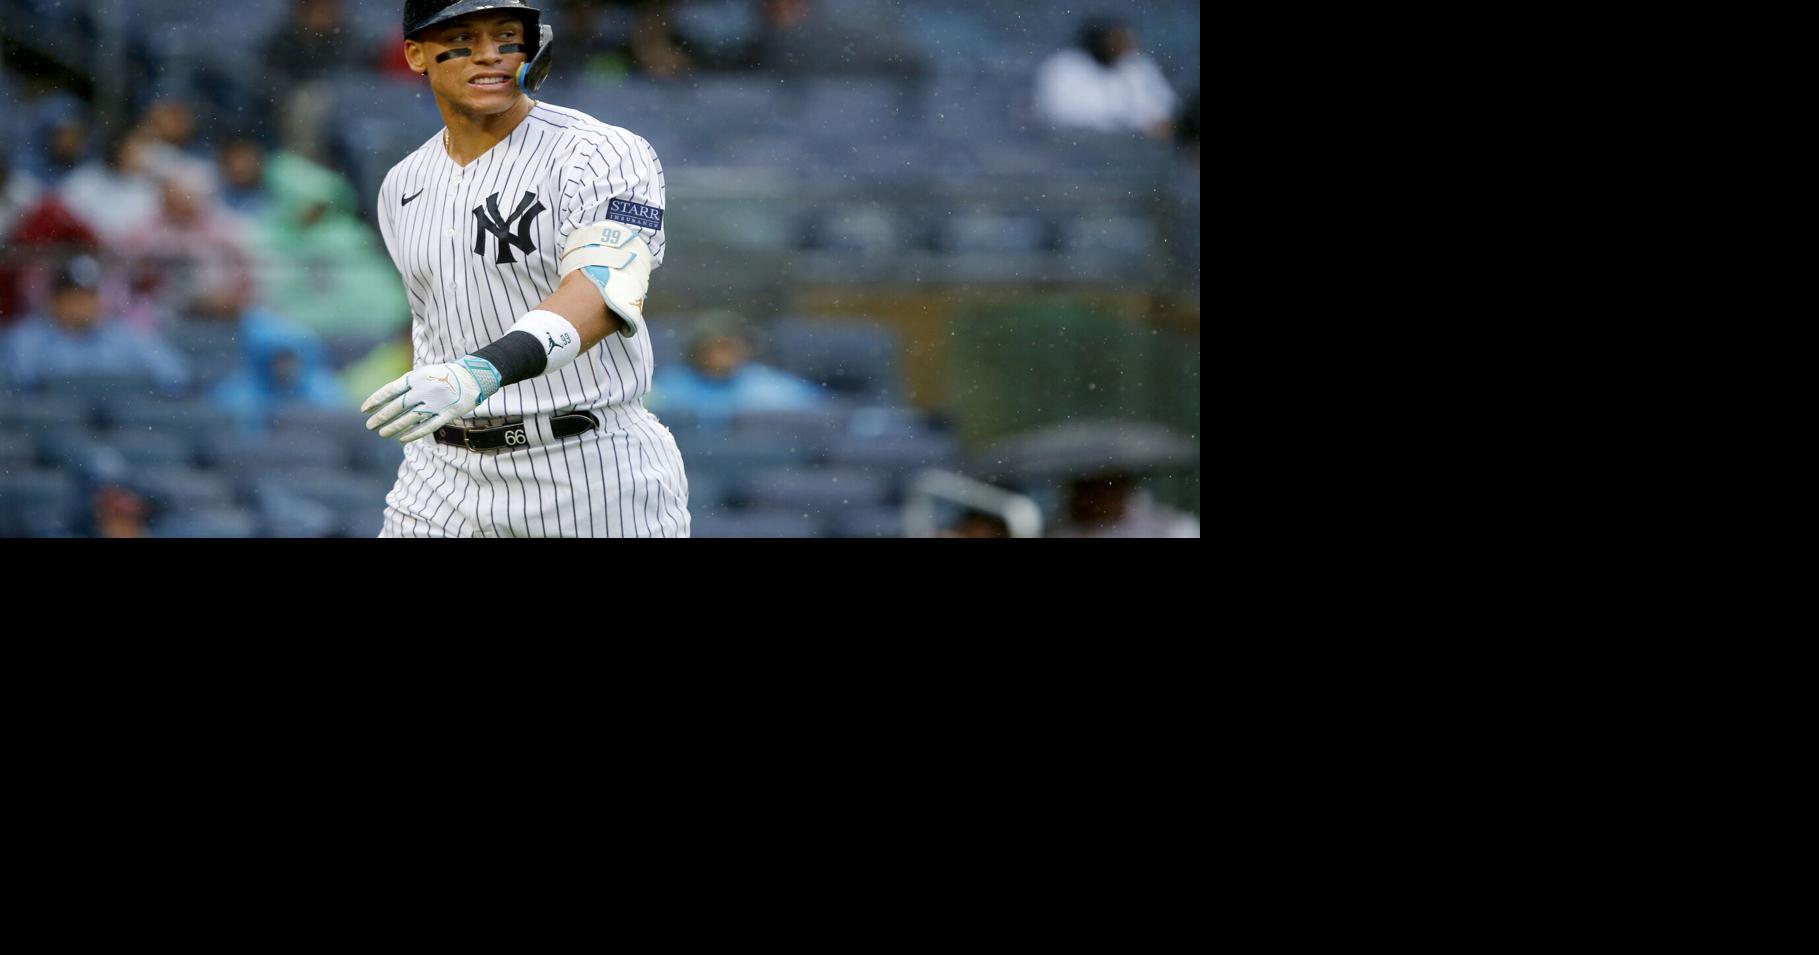 Yankees clinch AL East but Judge's home run record chase stalls